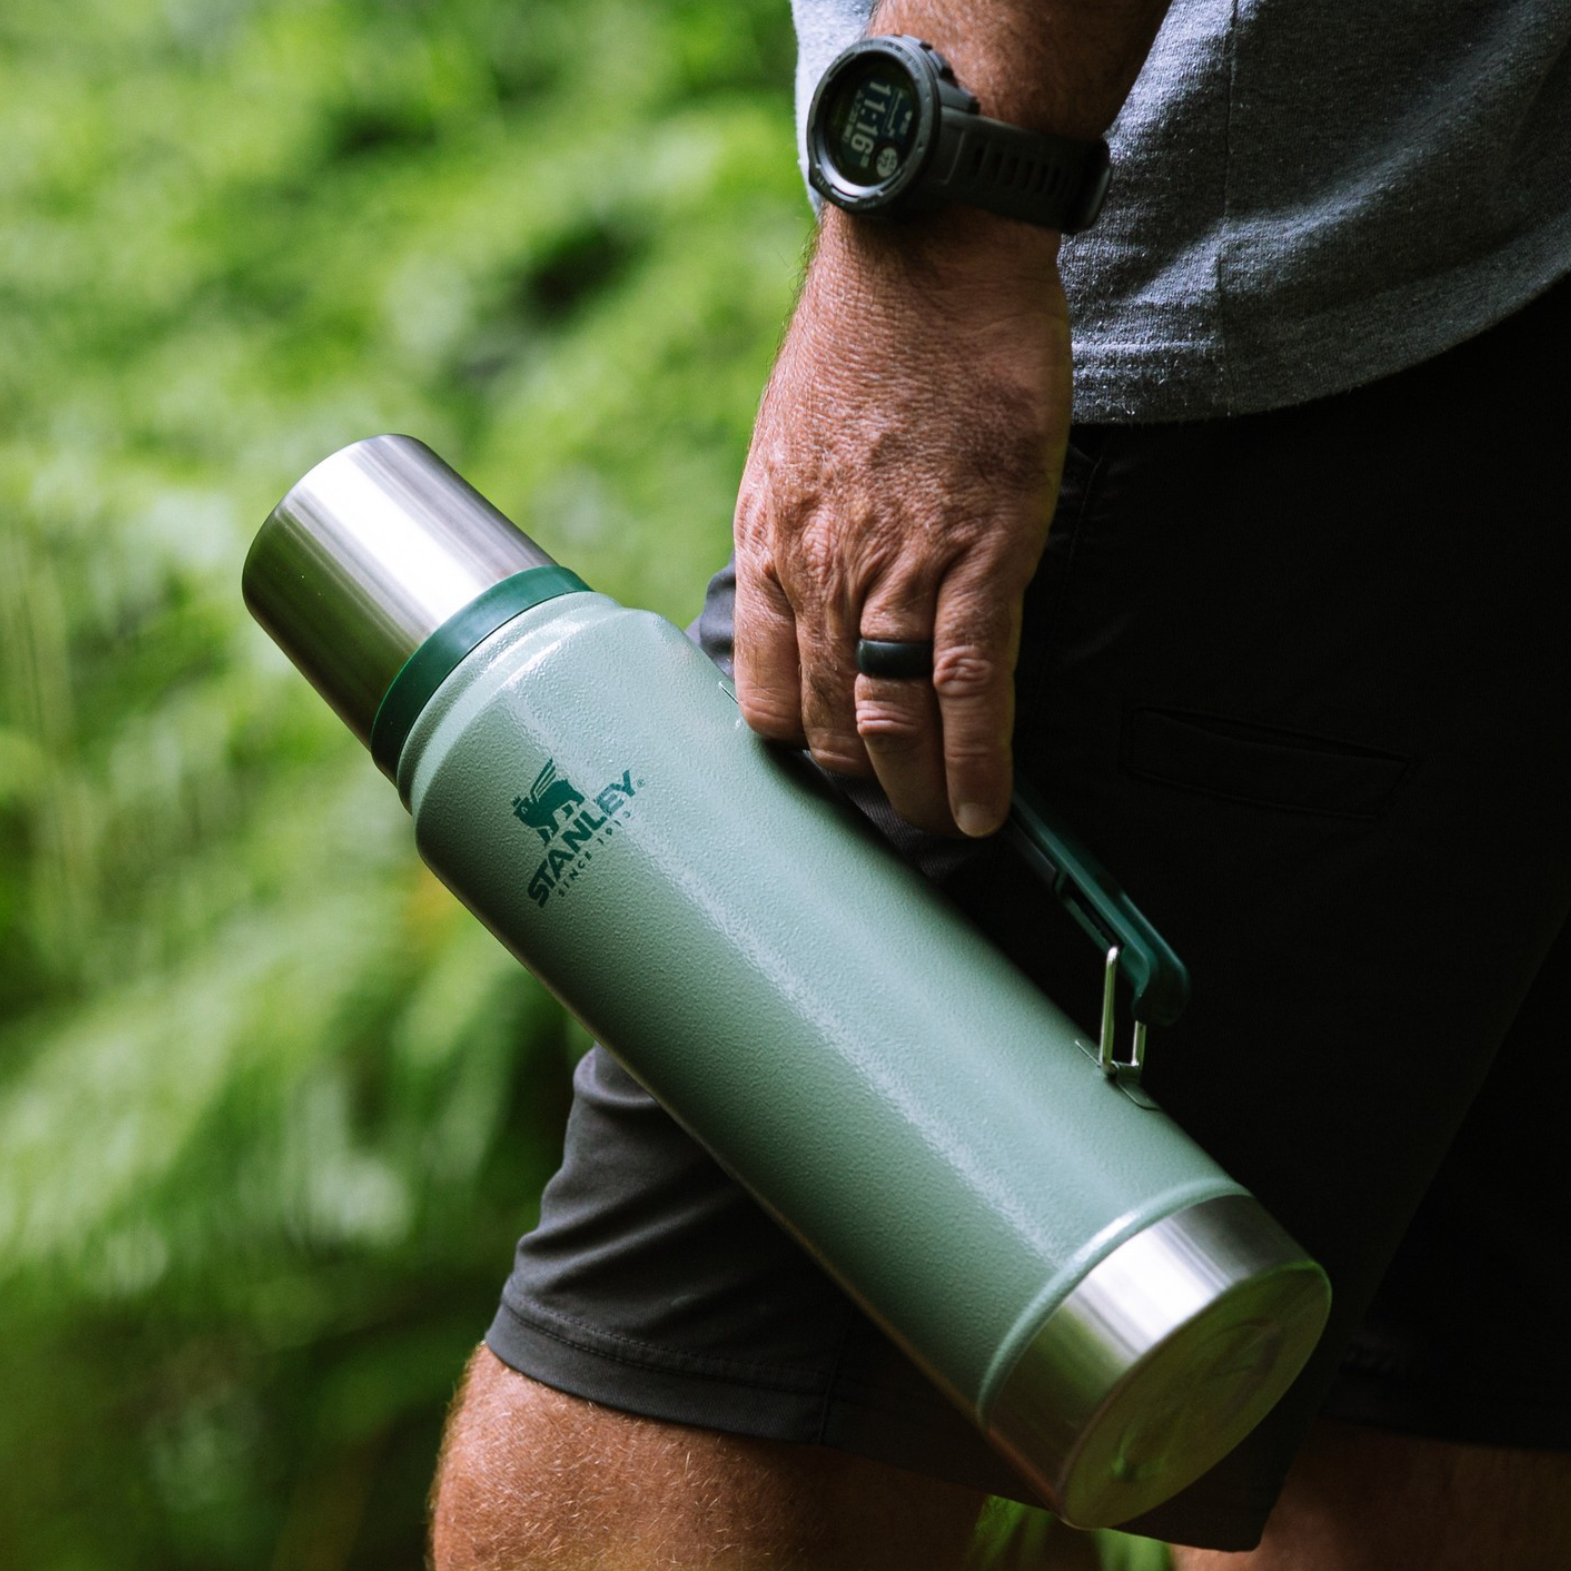 Stanley  Classic 1 Litre Thermos – PAPER PLANE